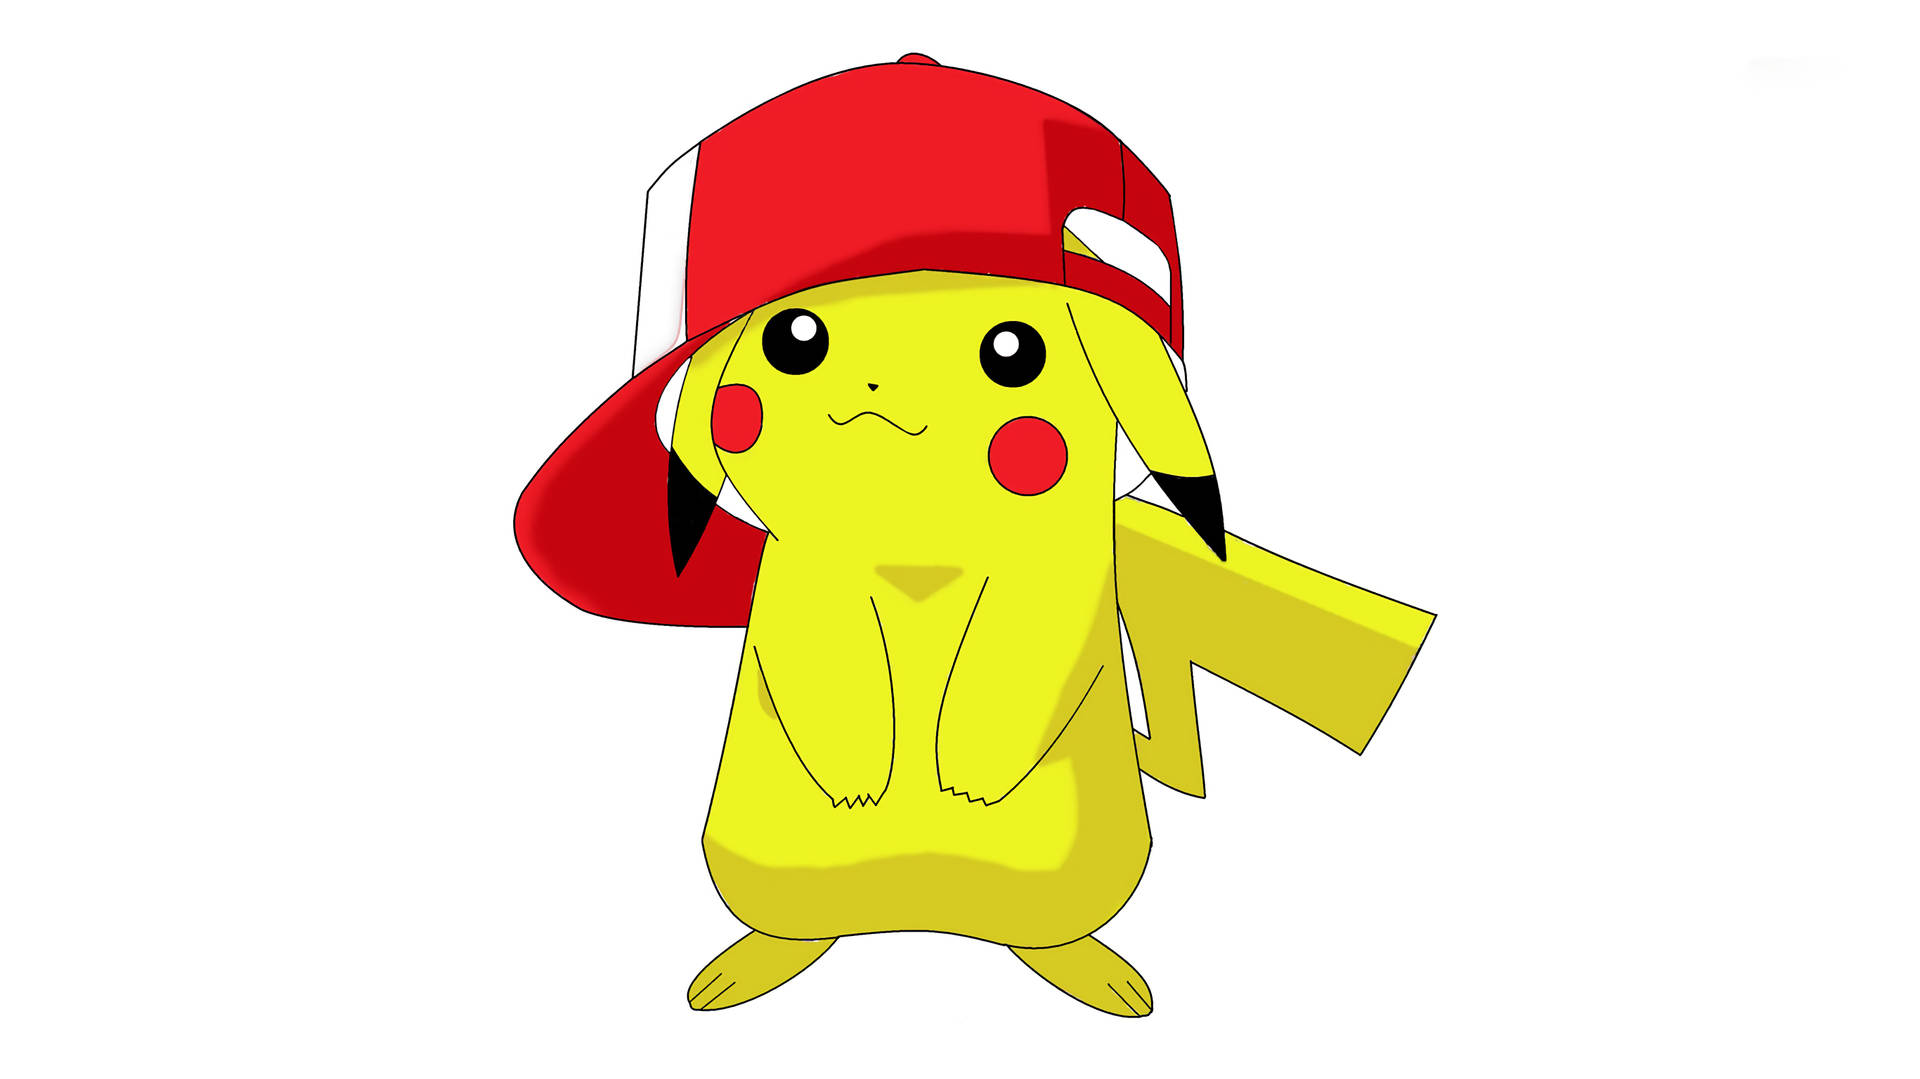 Cool Pokemon Pikachu With Red Hat